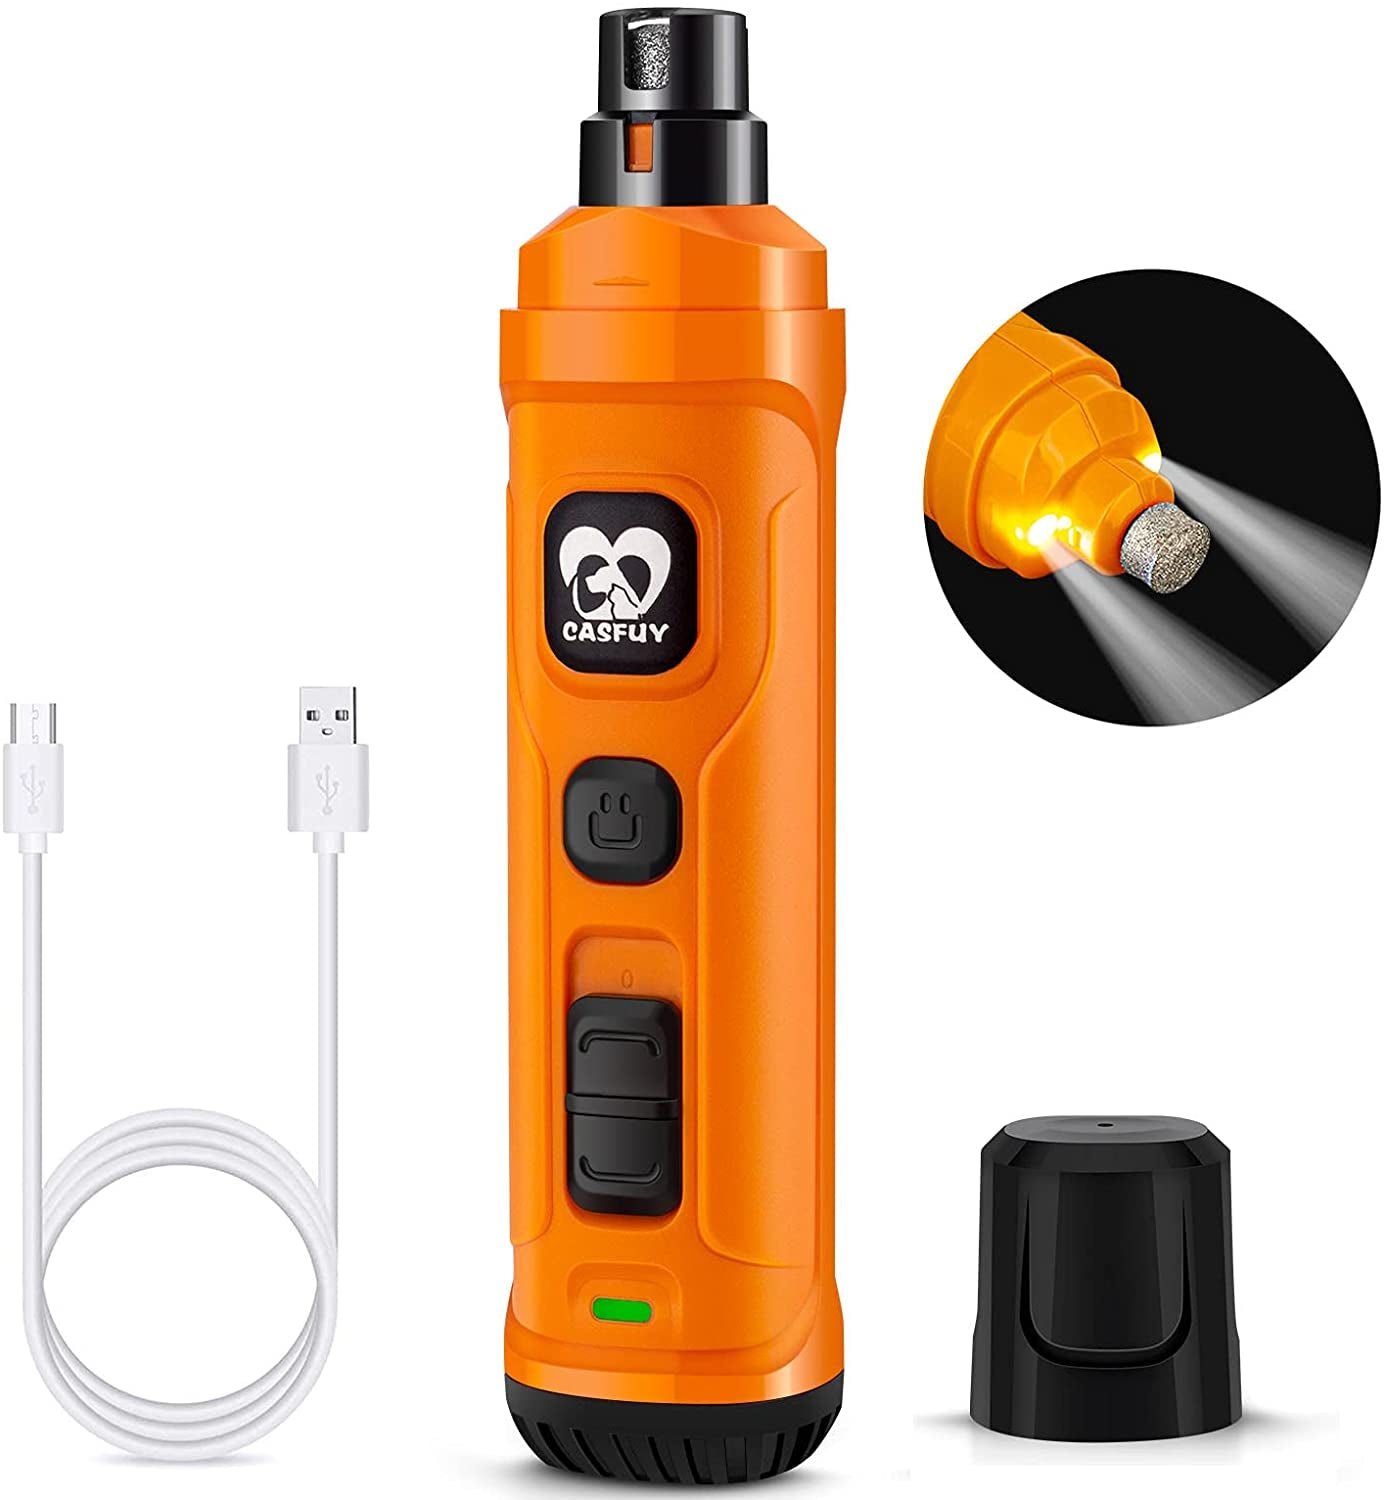 Dog Nail Grinder with 2 LED Light - New Version 2-Speed Powerful Electric Pet Nail Trimmer Professional Quiet Painless Paws Grooming & Smoothing for Small Medium Large Dogs and Cats (Orange)